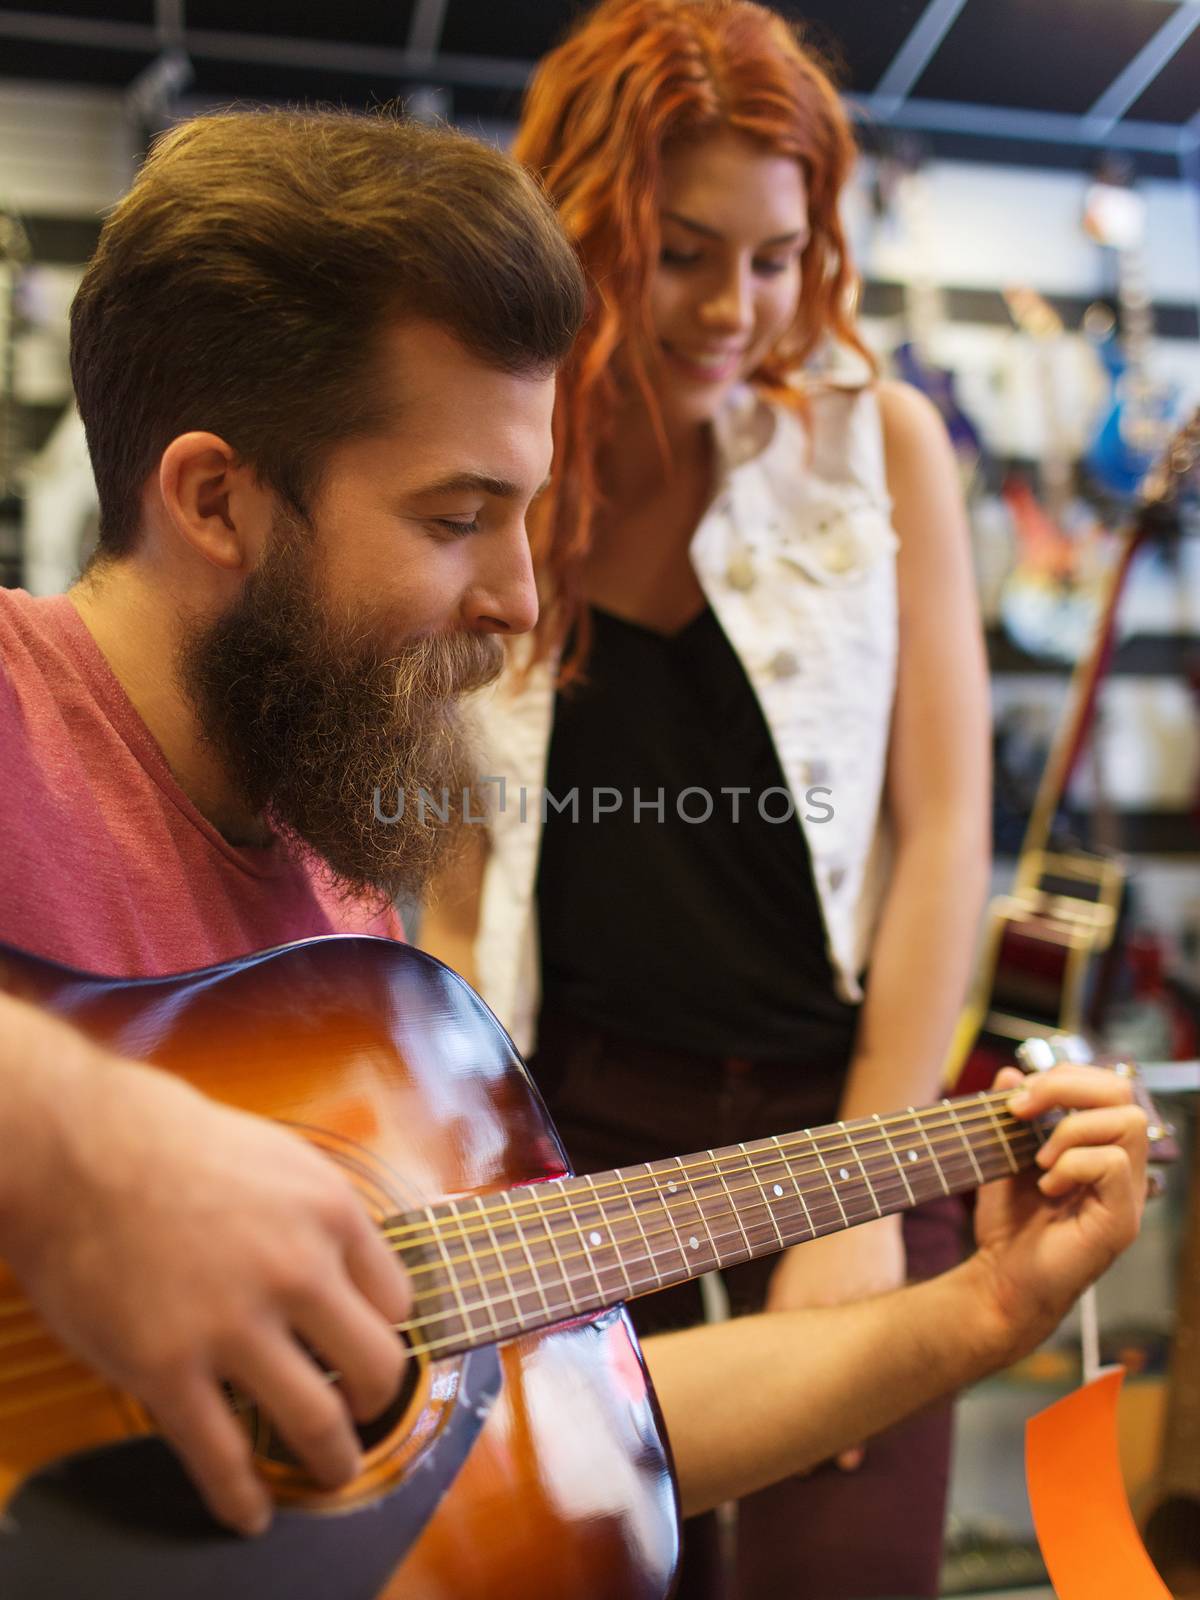 music, sale, people, musical instruments and entertainment concept - happy couple of musicians with guitar at music store